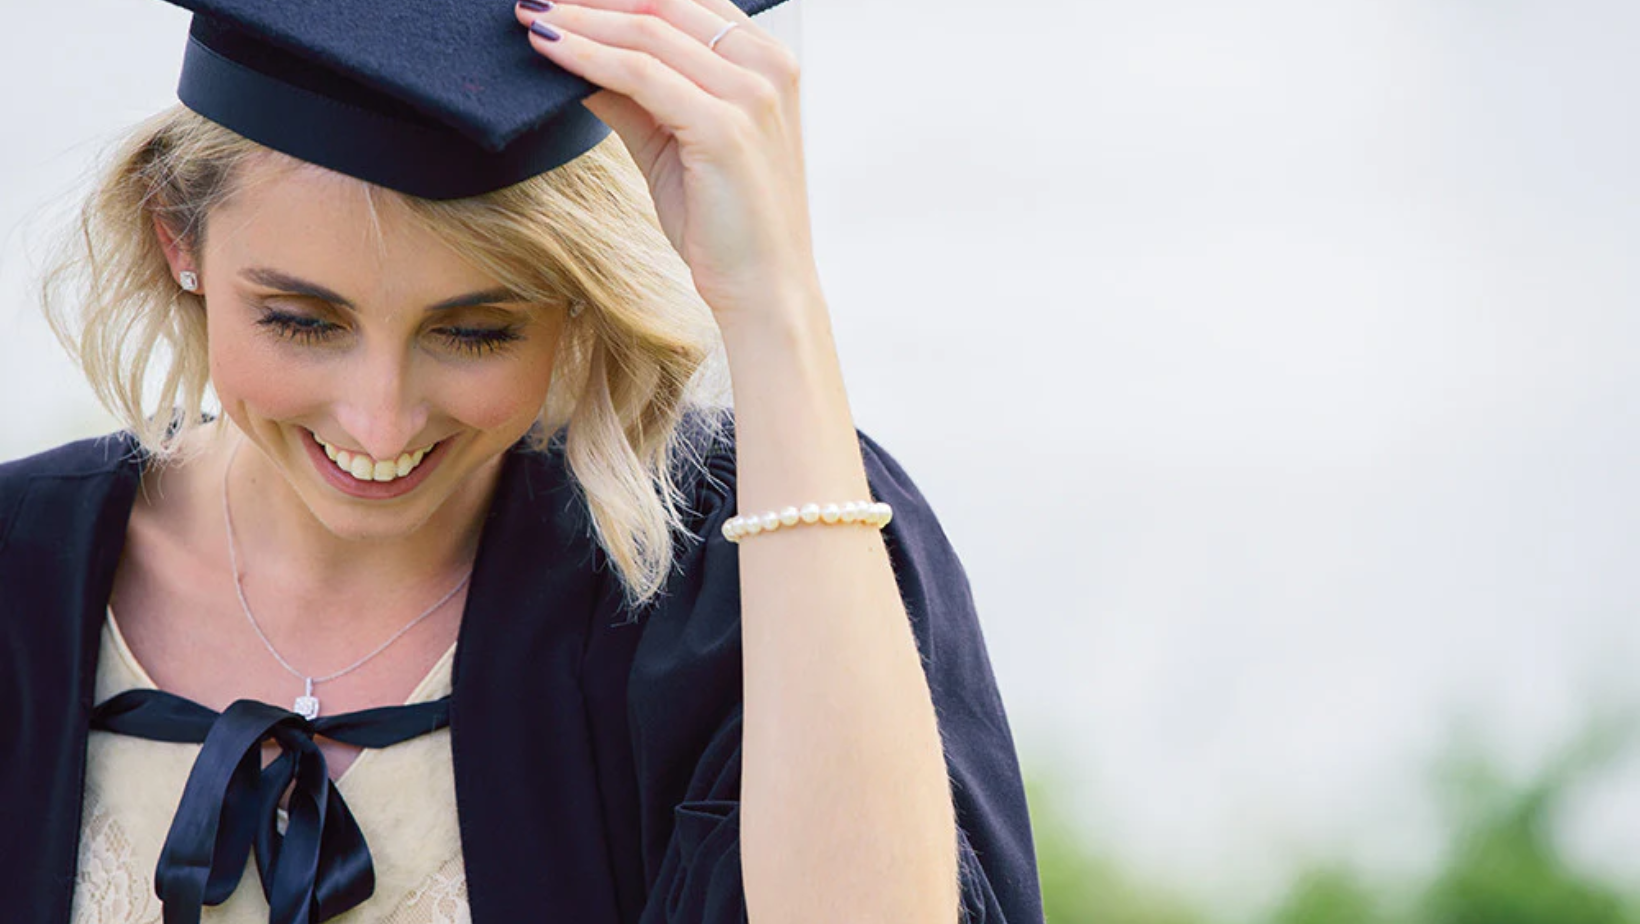 Graduation Day Etiquette: Dos and Don'ts for Wearing Jewellery During the Ceremony